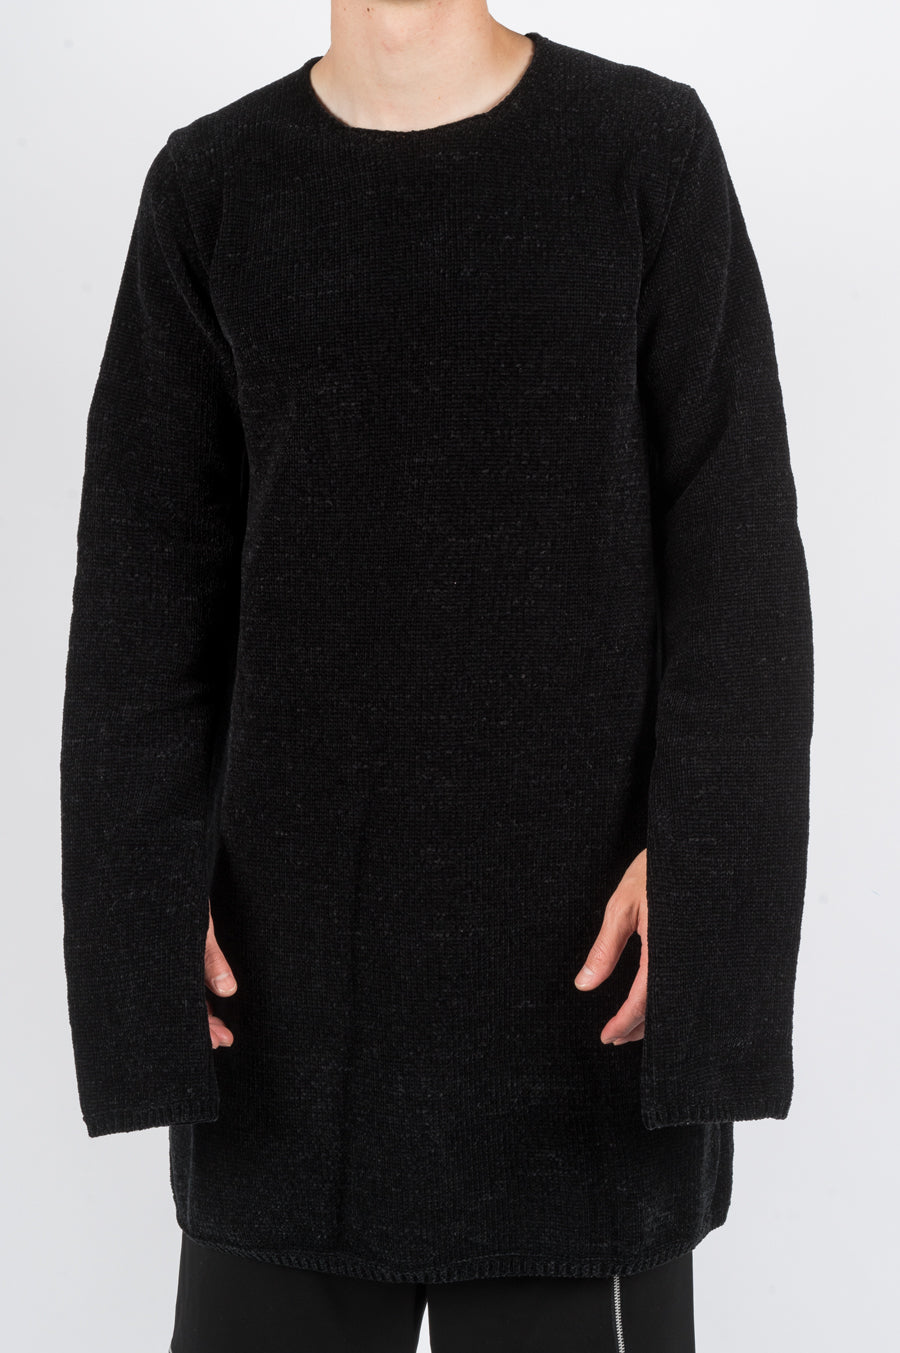 COMME DES GARCONS HOMME PLUS KNITTED SWEATER BLACK - BLENDS